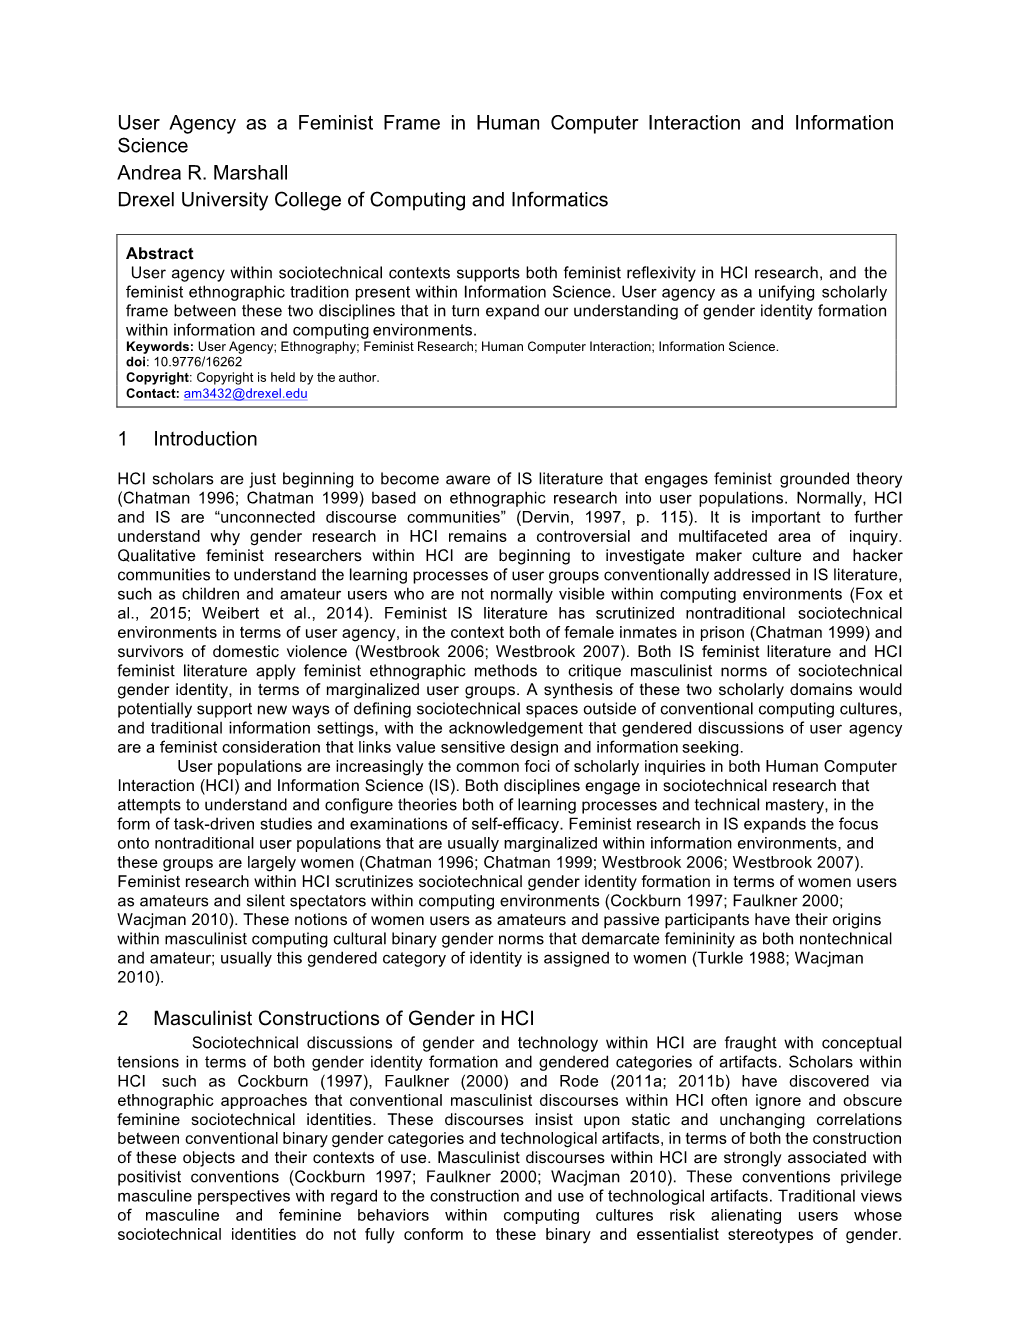 User Agency As a Feminist Frame in Human Computer Interaction and Information Science Andrea R